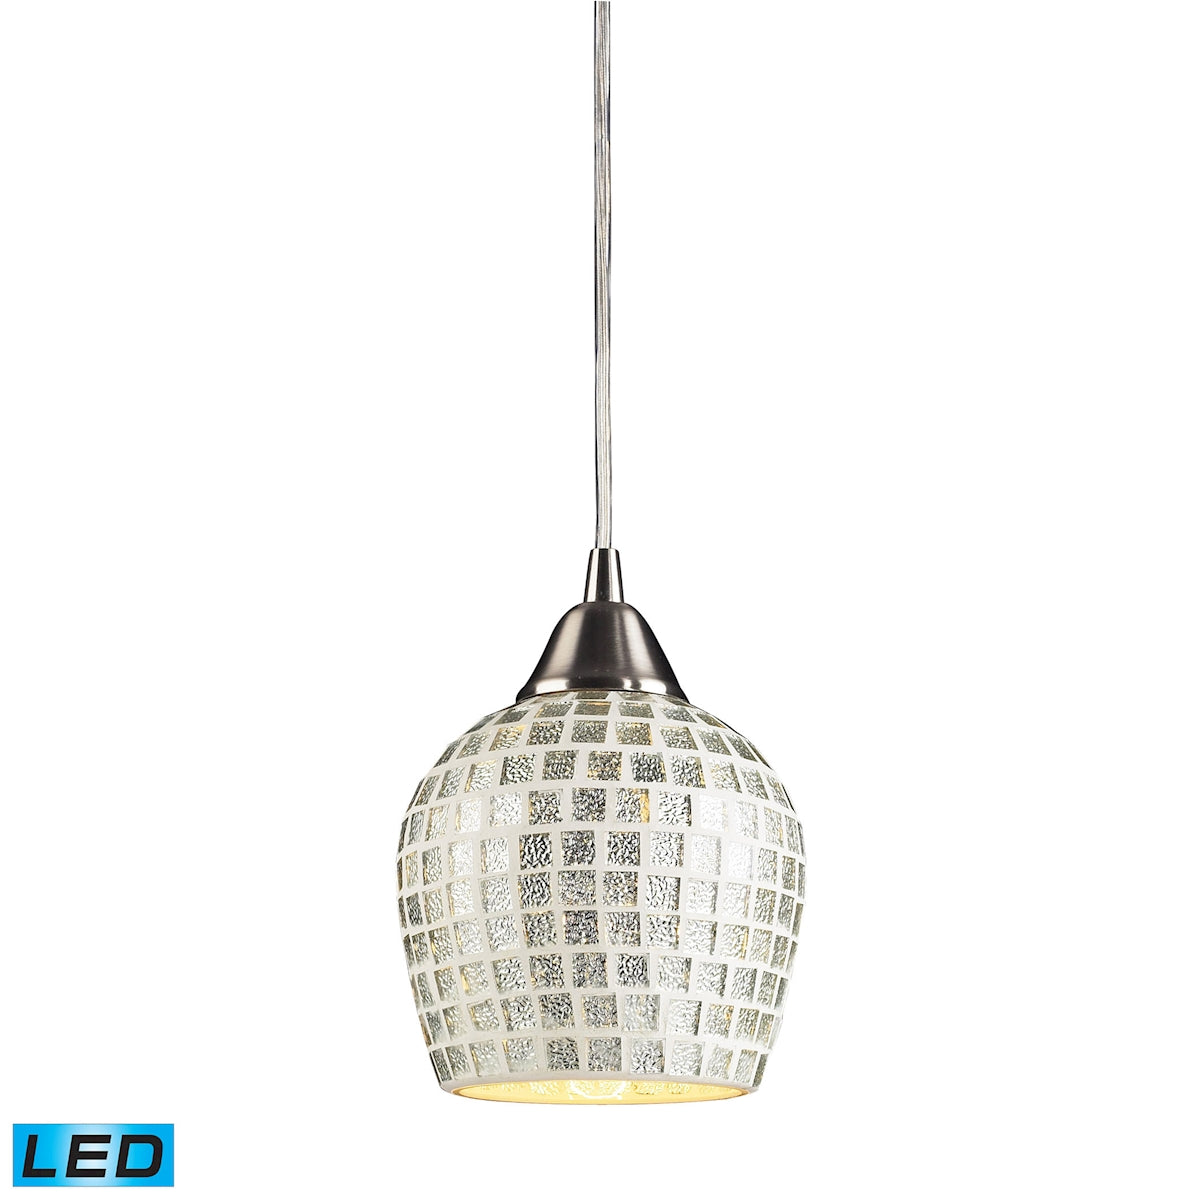 ELK Lighting 528-1SLV-LED Fusion 1-Light Mini Pendant in Satin Nickel with Silver Mosaic Glass - Includes LED Bulb